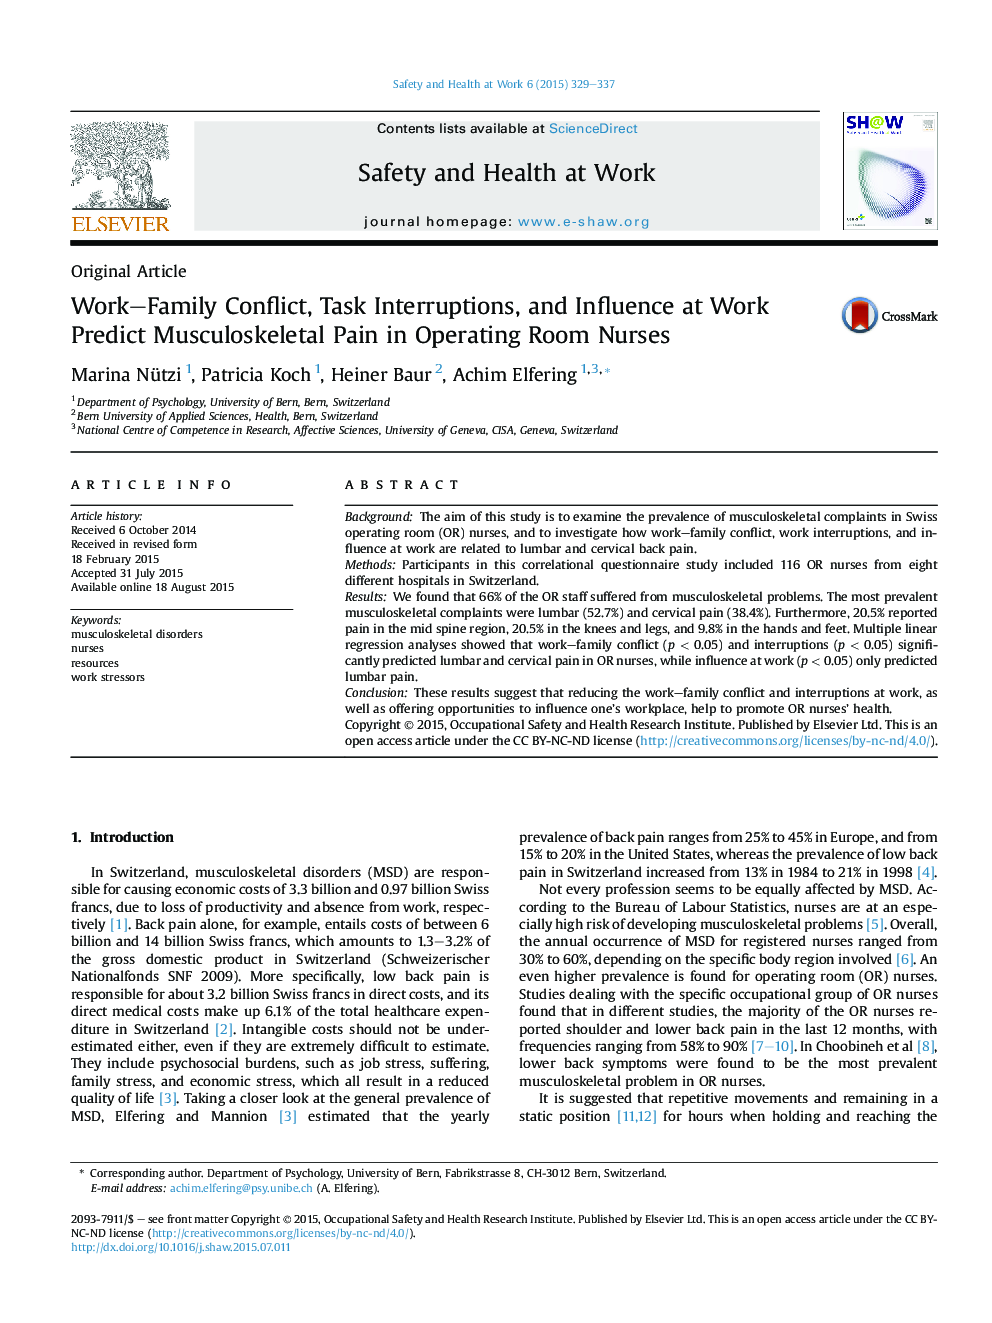 Work–Family Conflict, Task Interruptions, and Influence at Work Predict Musculoskeletal Pain in Operating Room Nurses 